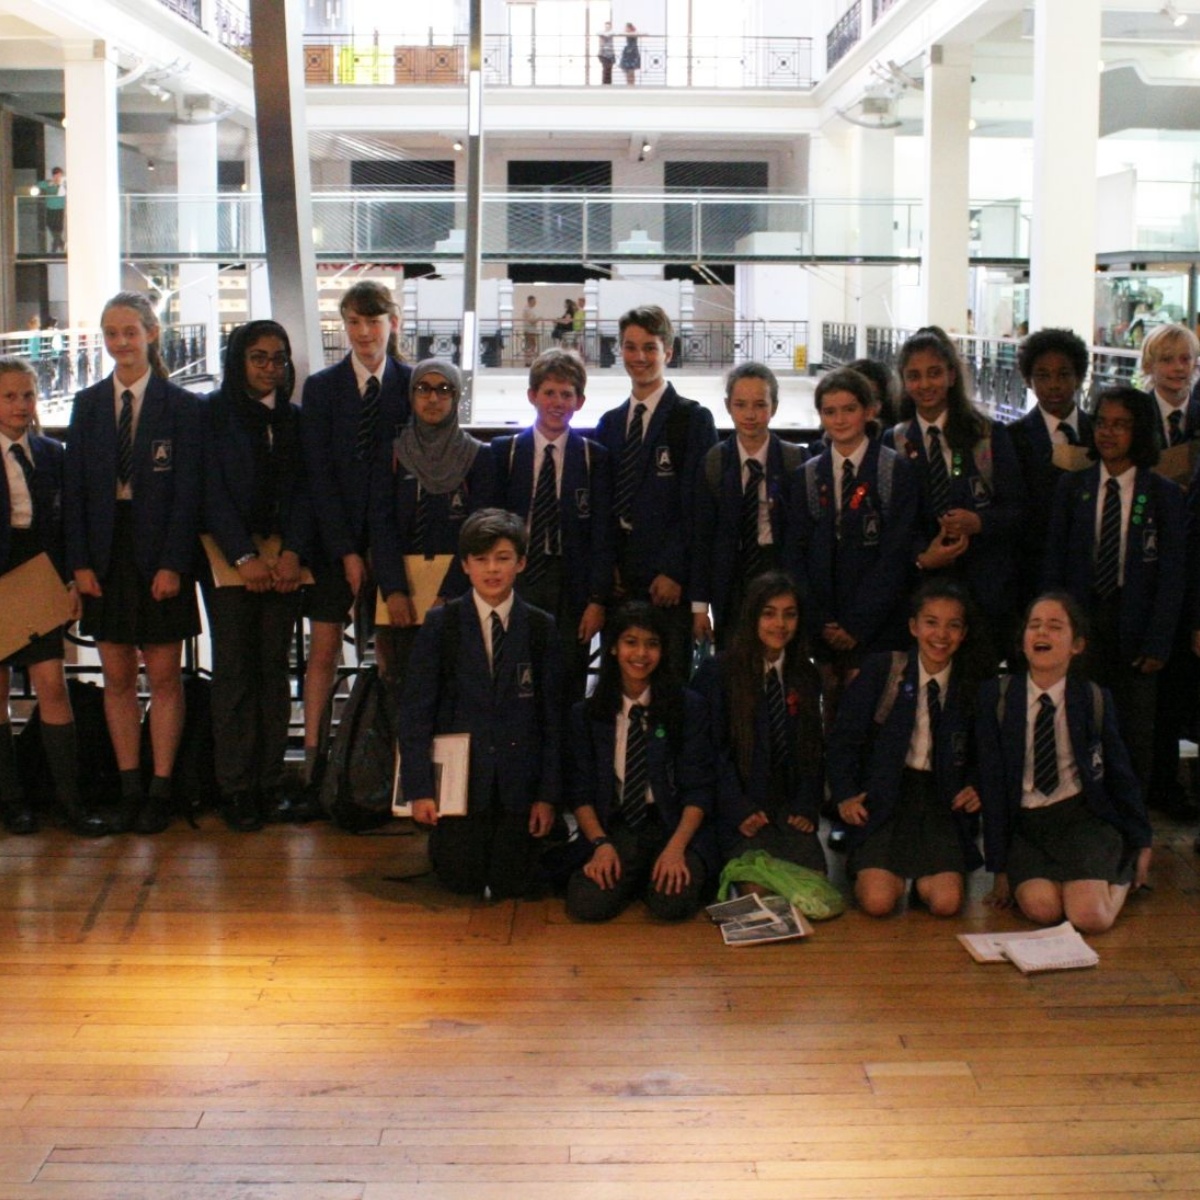 ashcroft-technology-academy-honours-trip-to-winton-gallery